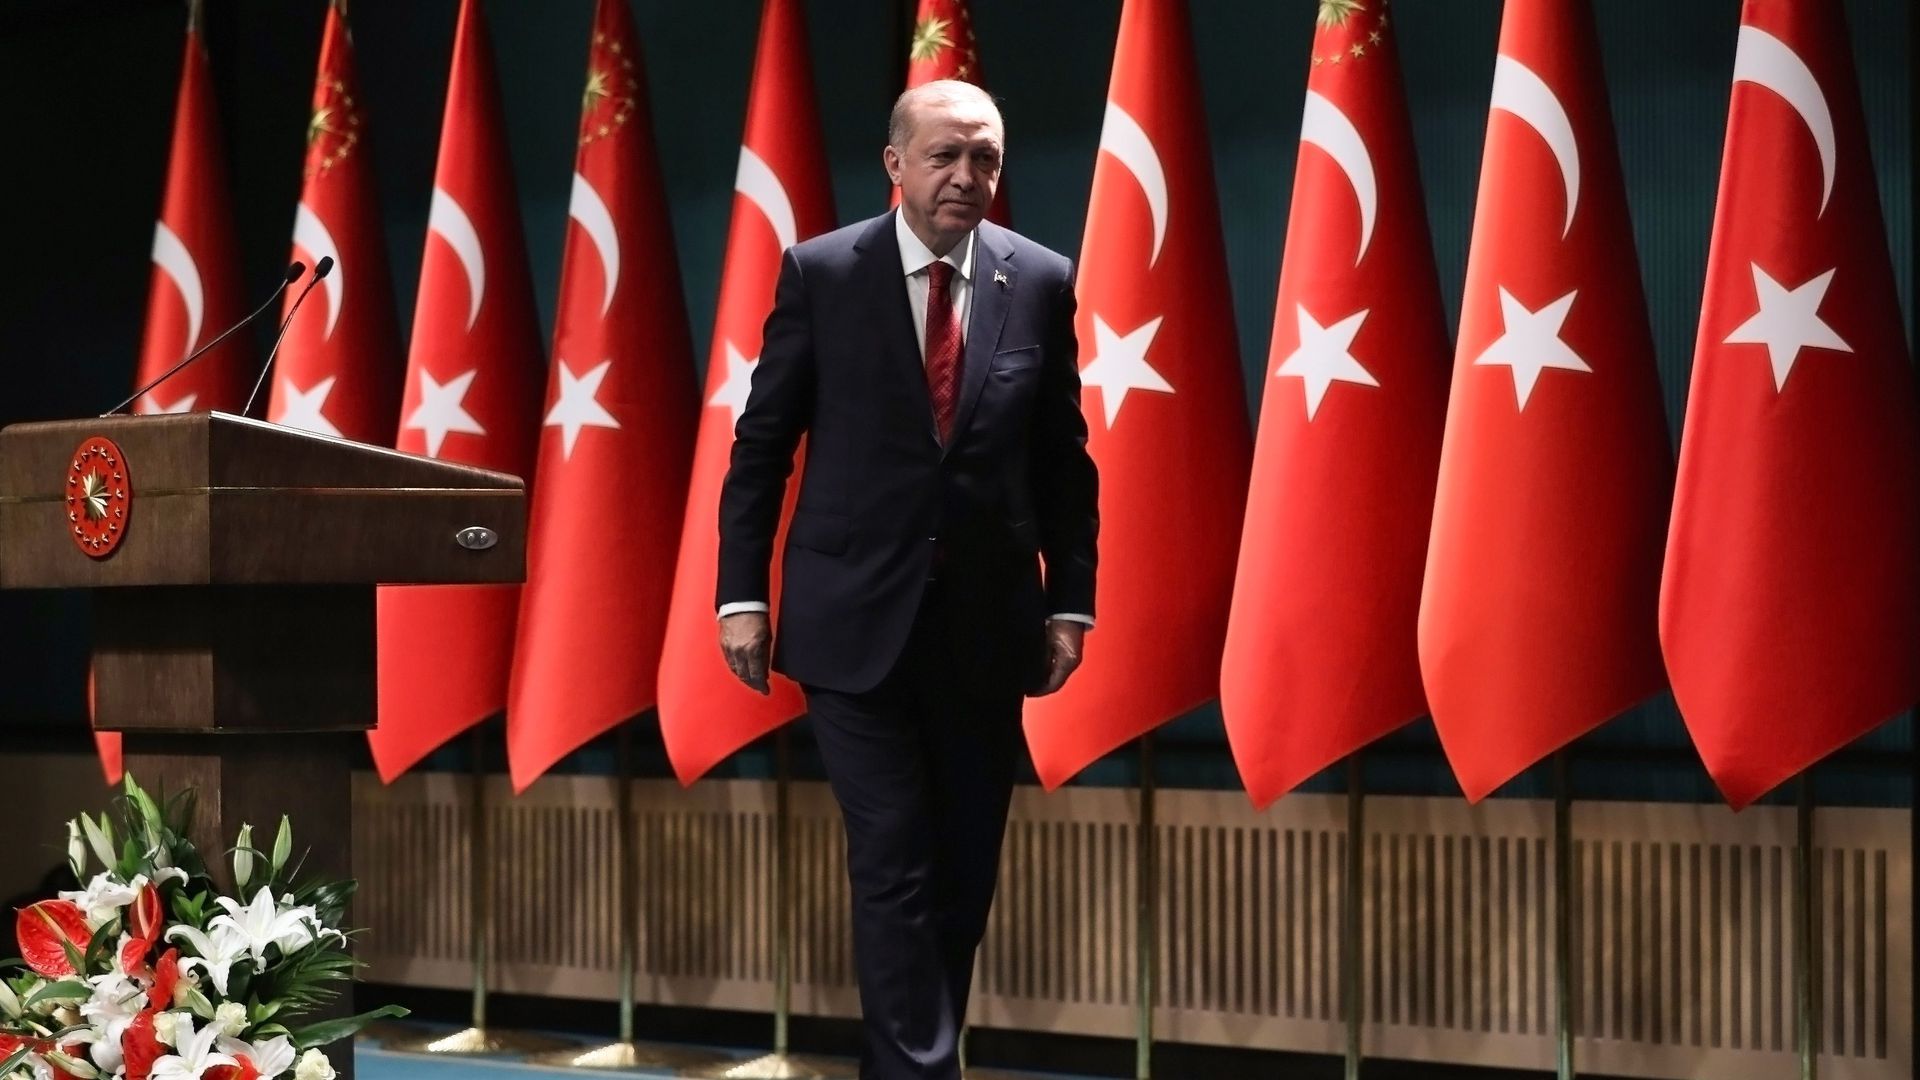 Why Erdoğan called snap elections